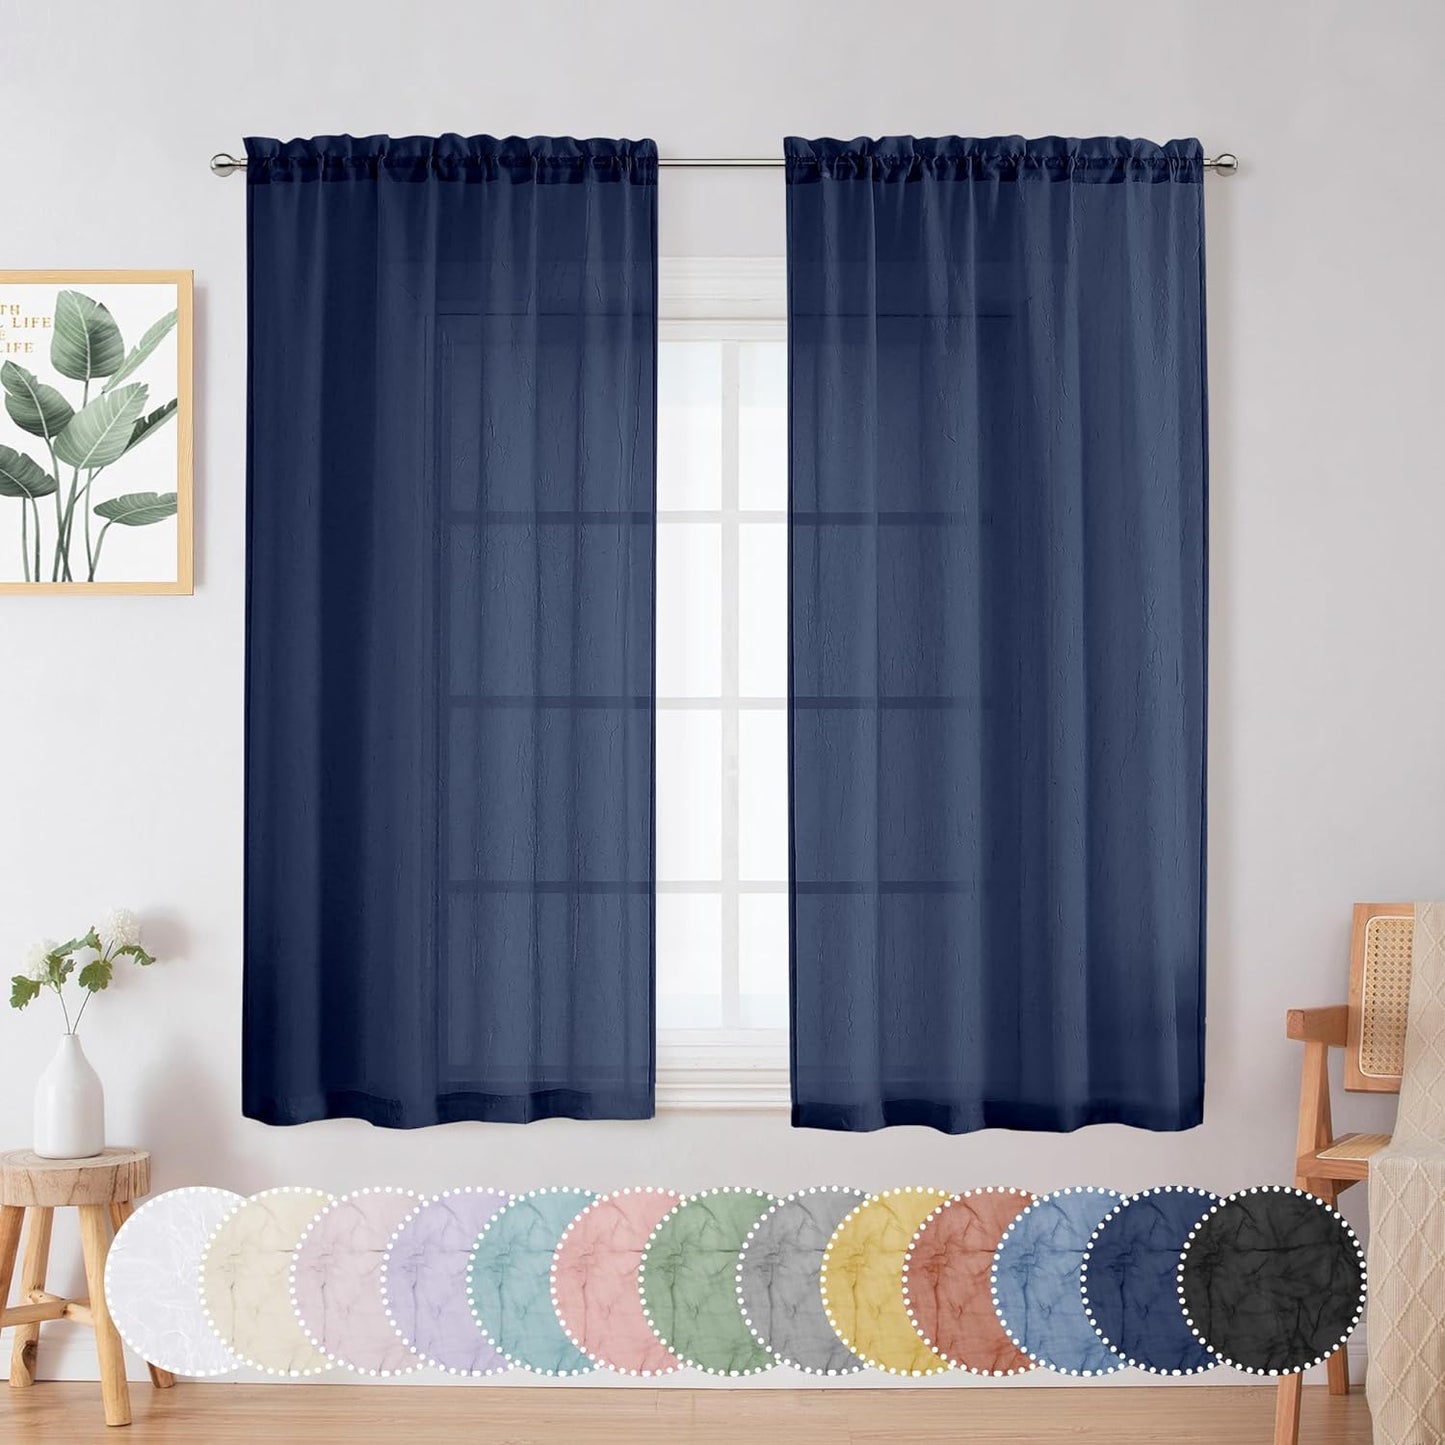 Crushed Sheer White Curtains 63 Inch Length 2 Panels, Light Filtering Solid Crinkle Voile Short Sheer Curtian for Bedroom Living Room, Each 42Wx63L Inches  Chyhomenyc Navy Blue 42 W X 54 L 